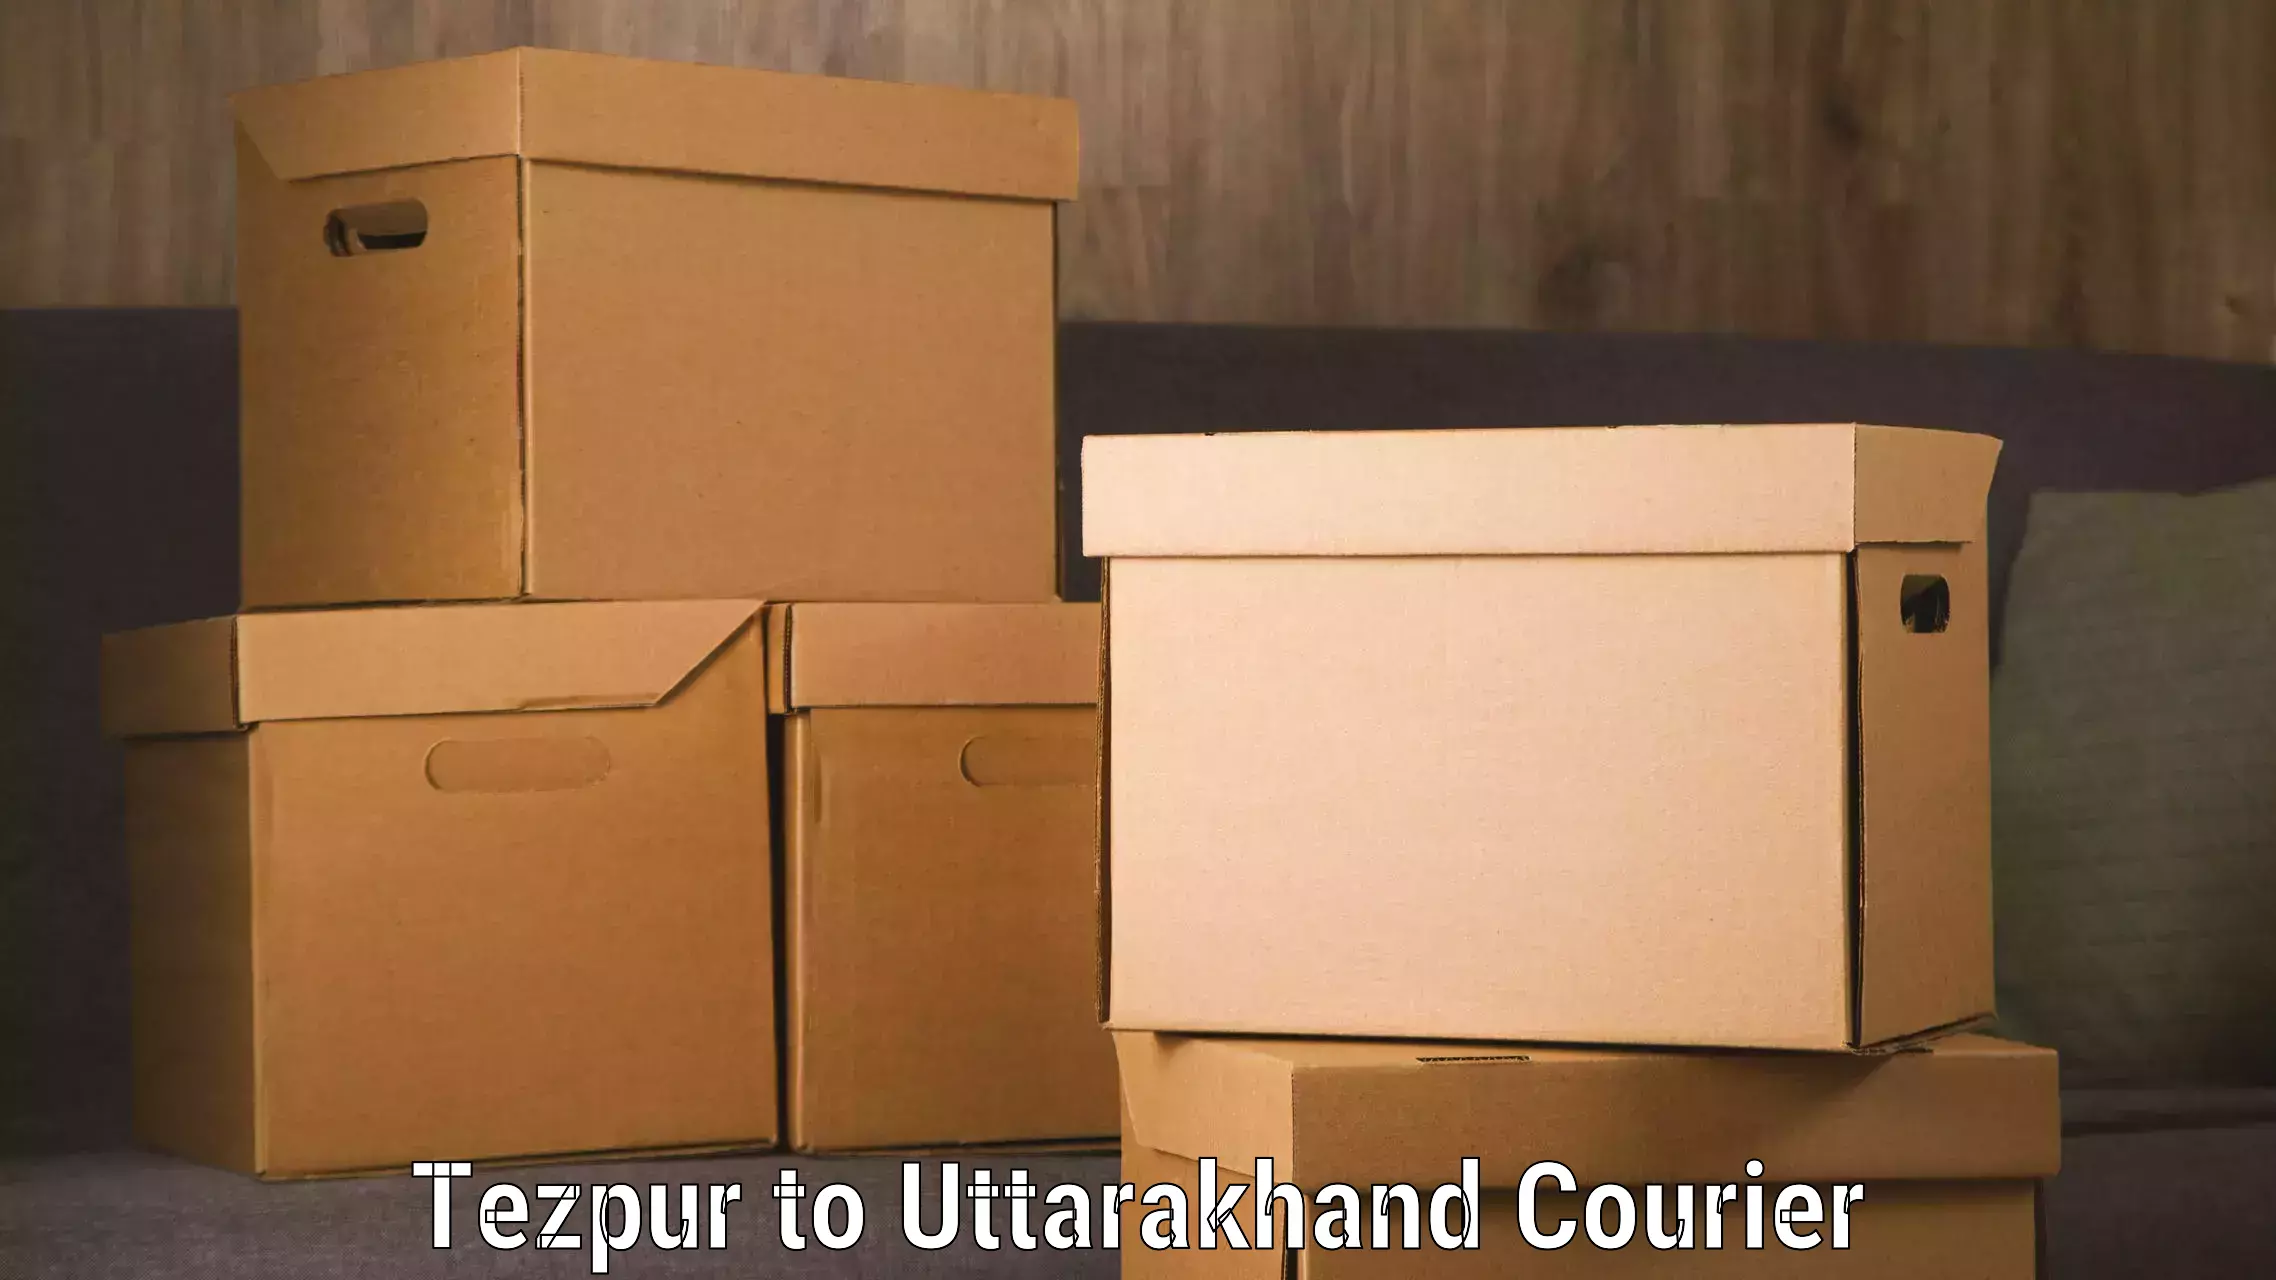 Luggage delivery logistics Tezpur to Someshwar